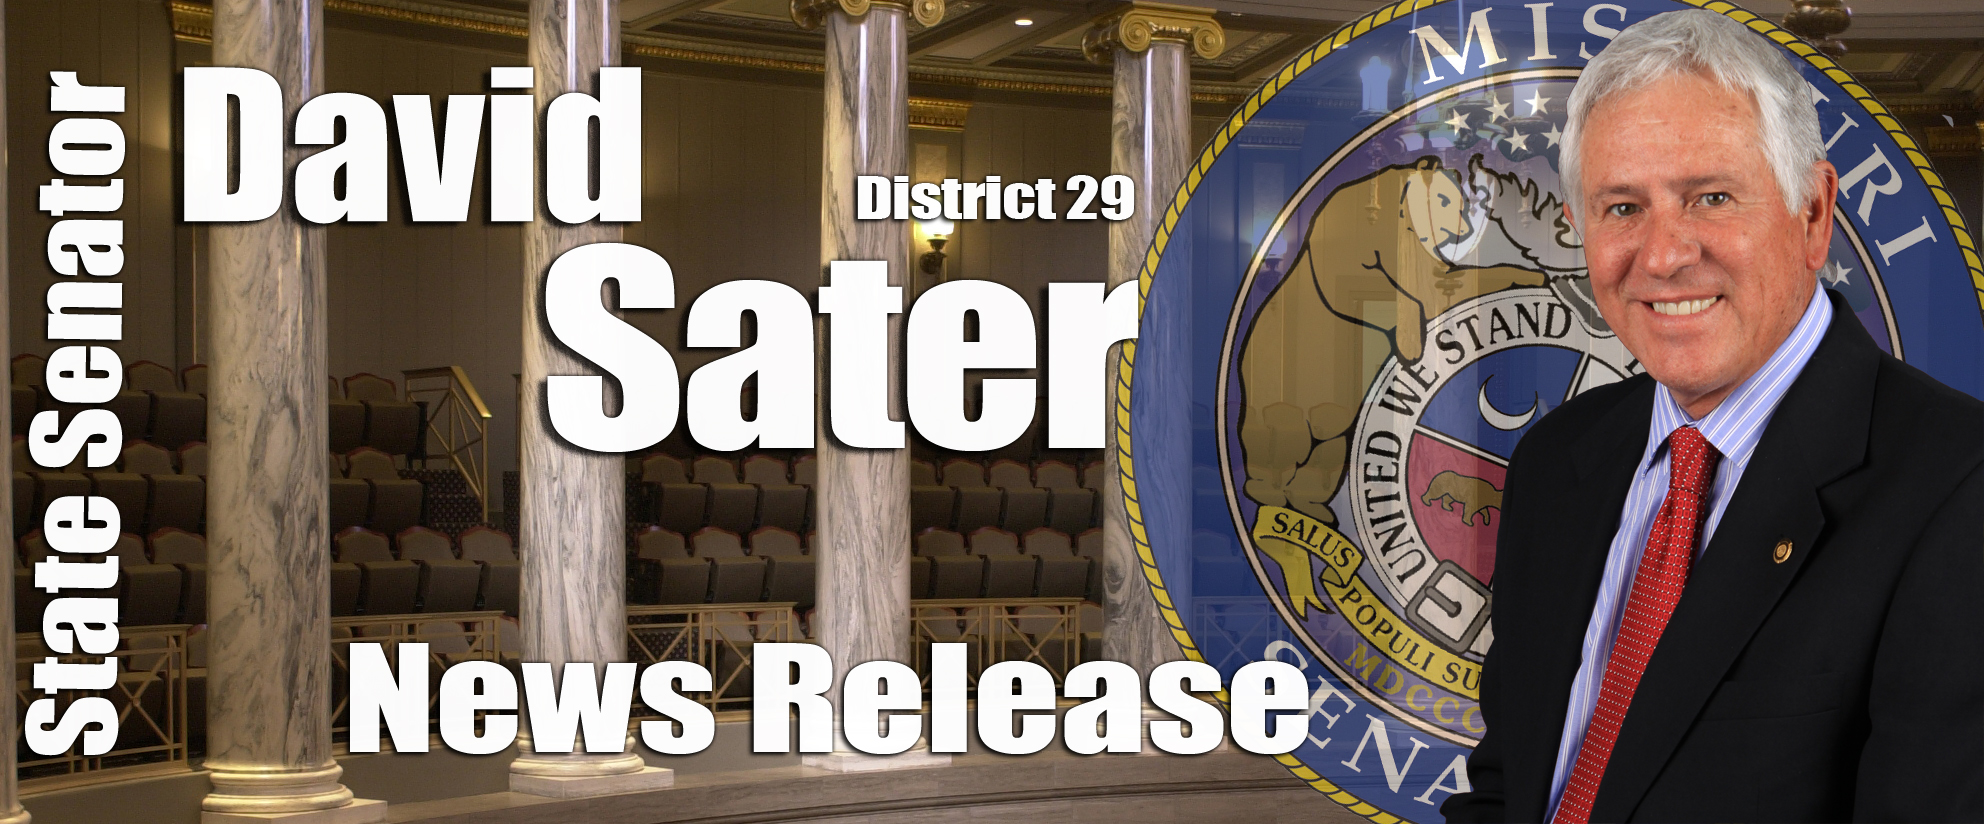 Sater - News Release Banner - 010813 copy